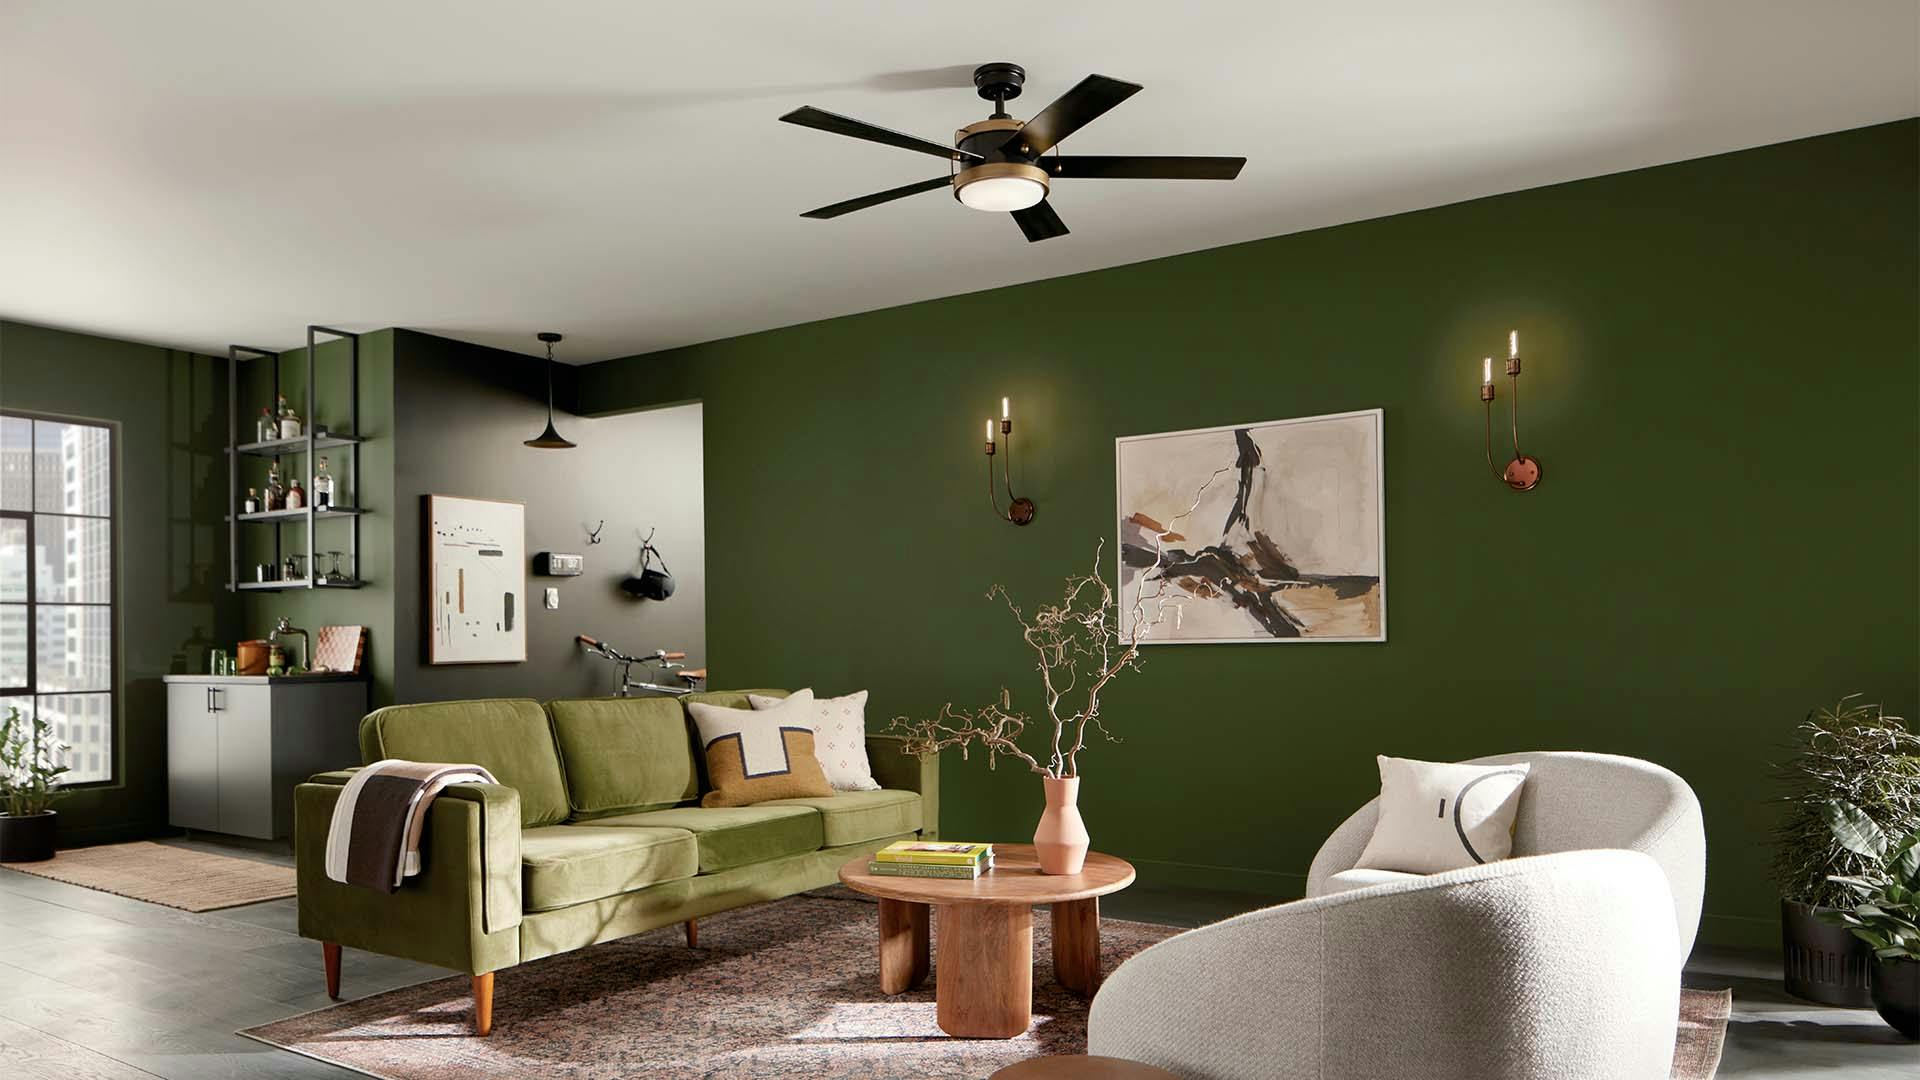 Living room with green walls and couches with a Salvo ceiling fan in center and sconces on wall.